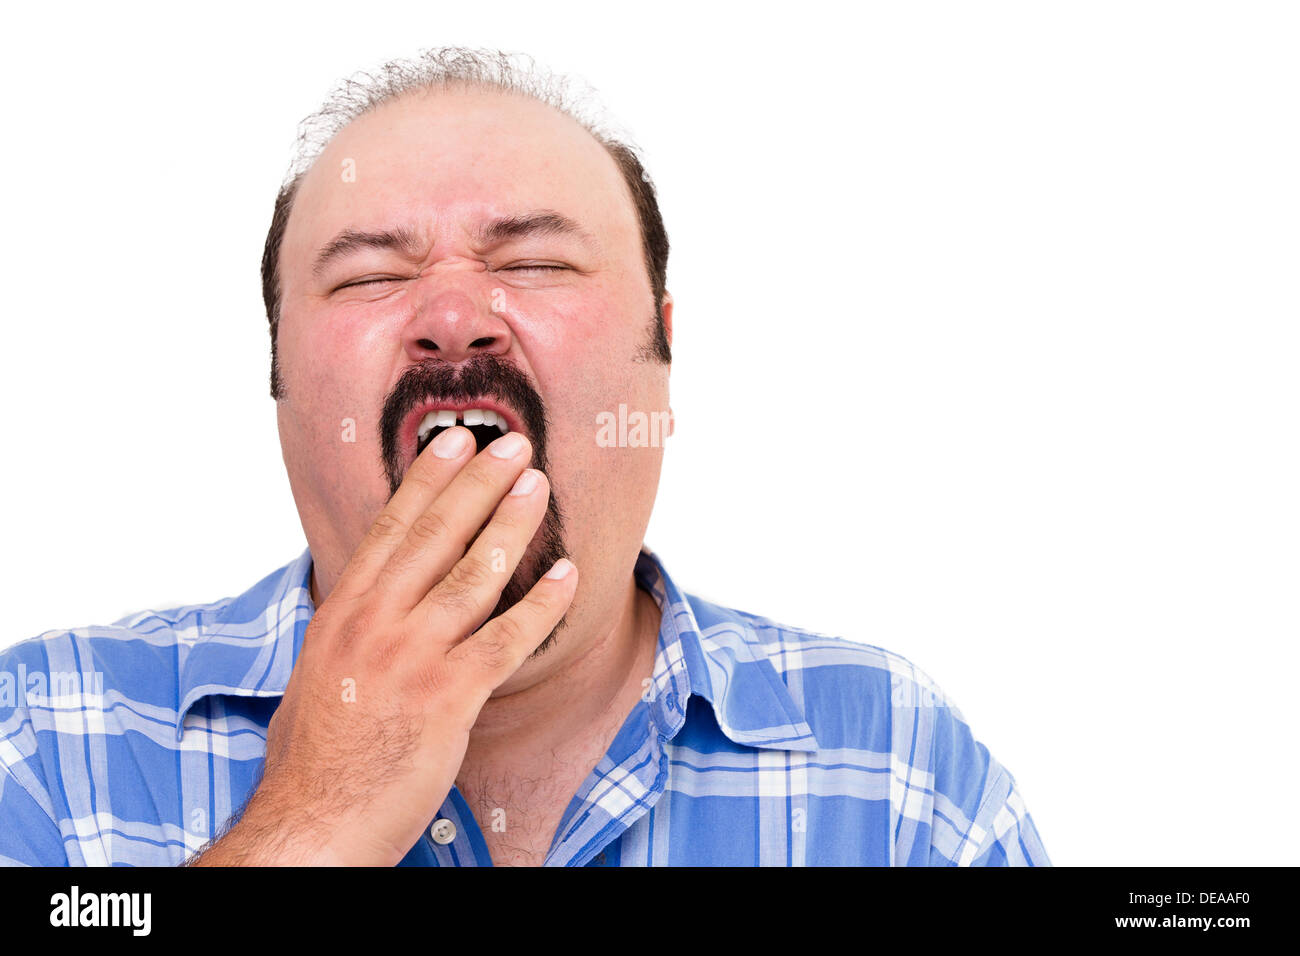 Tired man yawning with his hand to his mouth as he tries to fight off his exhaustion, isolated on white Stock Photo